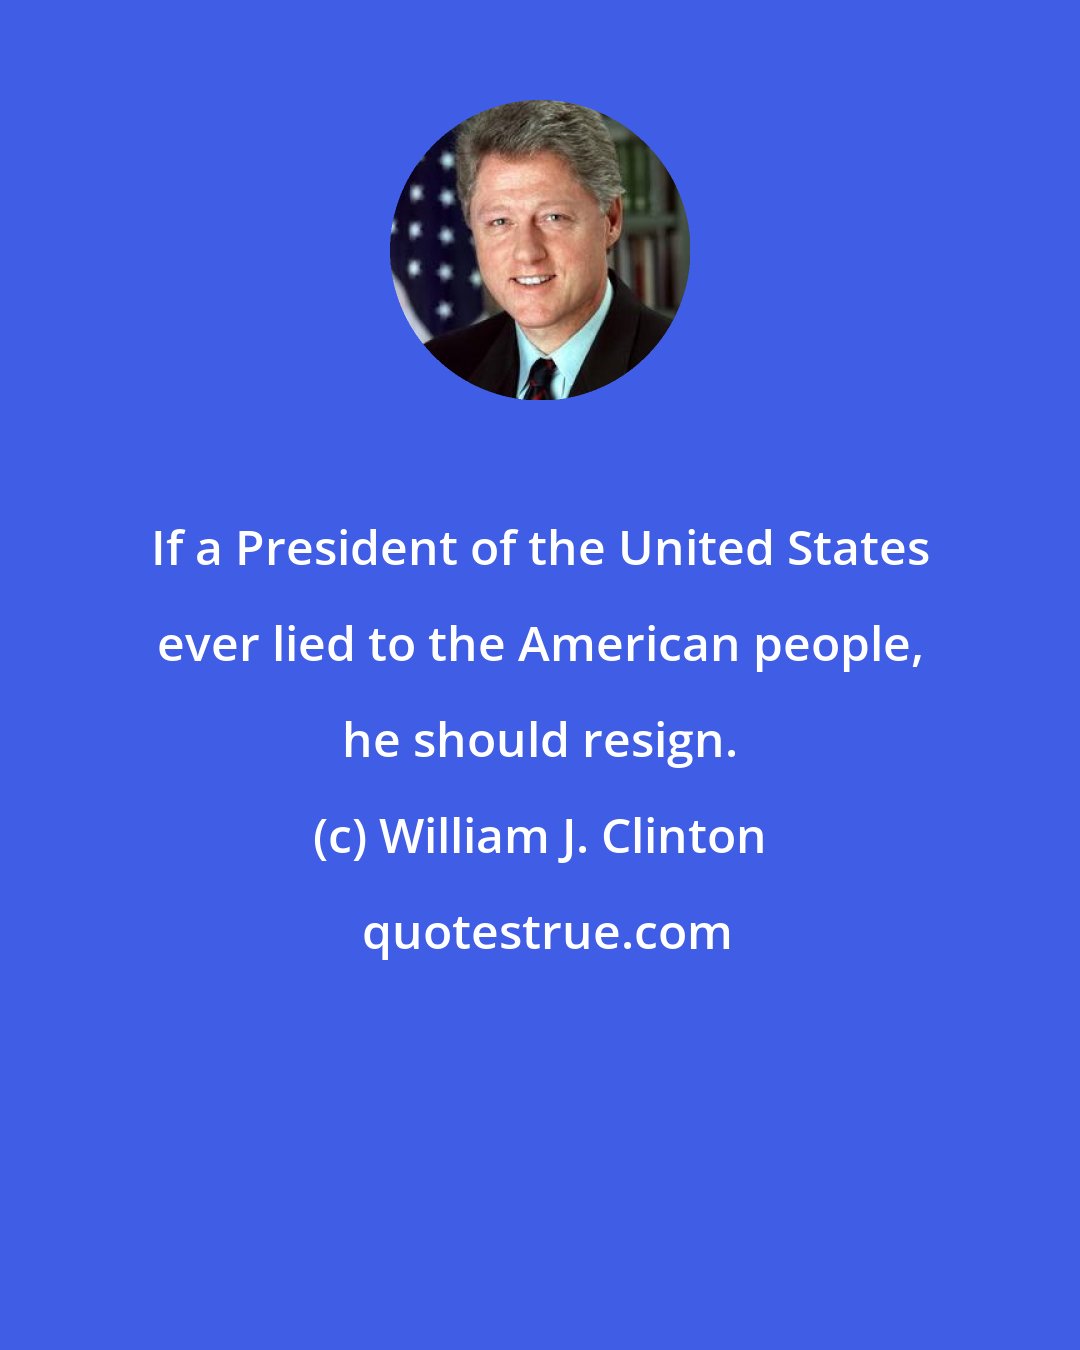 William J. Clinton: If a President of the United States ever lied to the American people, he should resign.